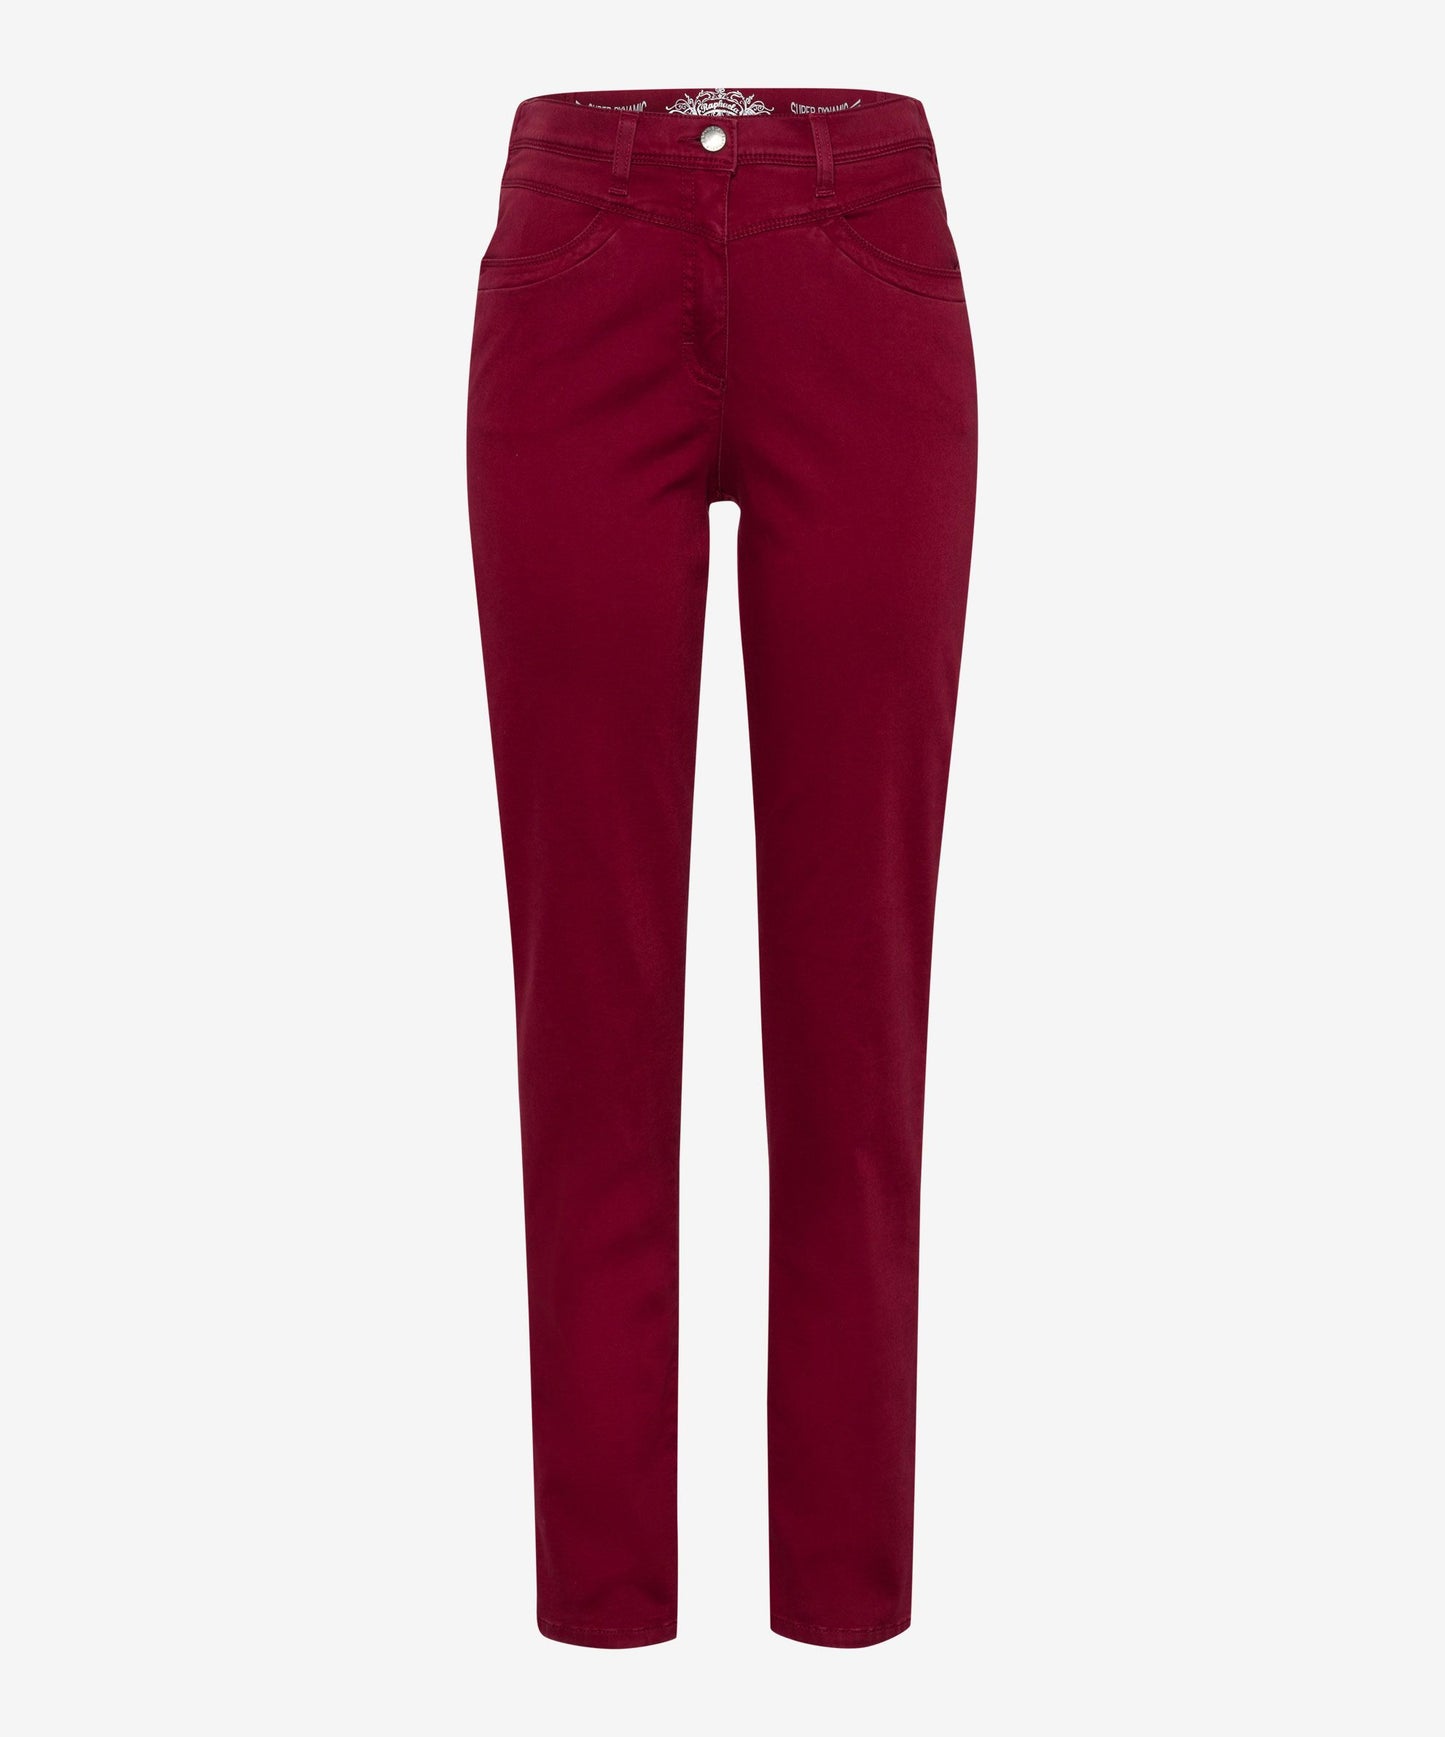 Style Laura New (Cranberry)